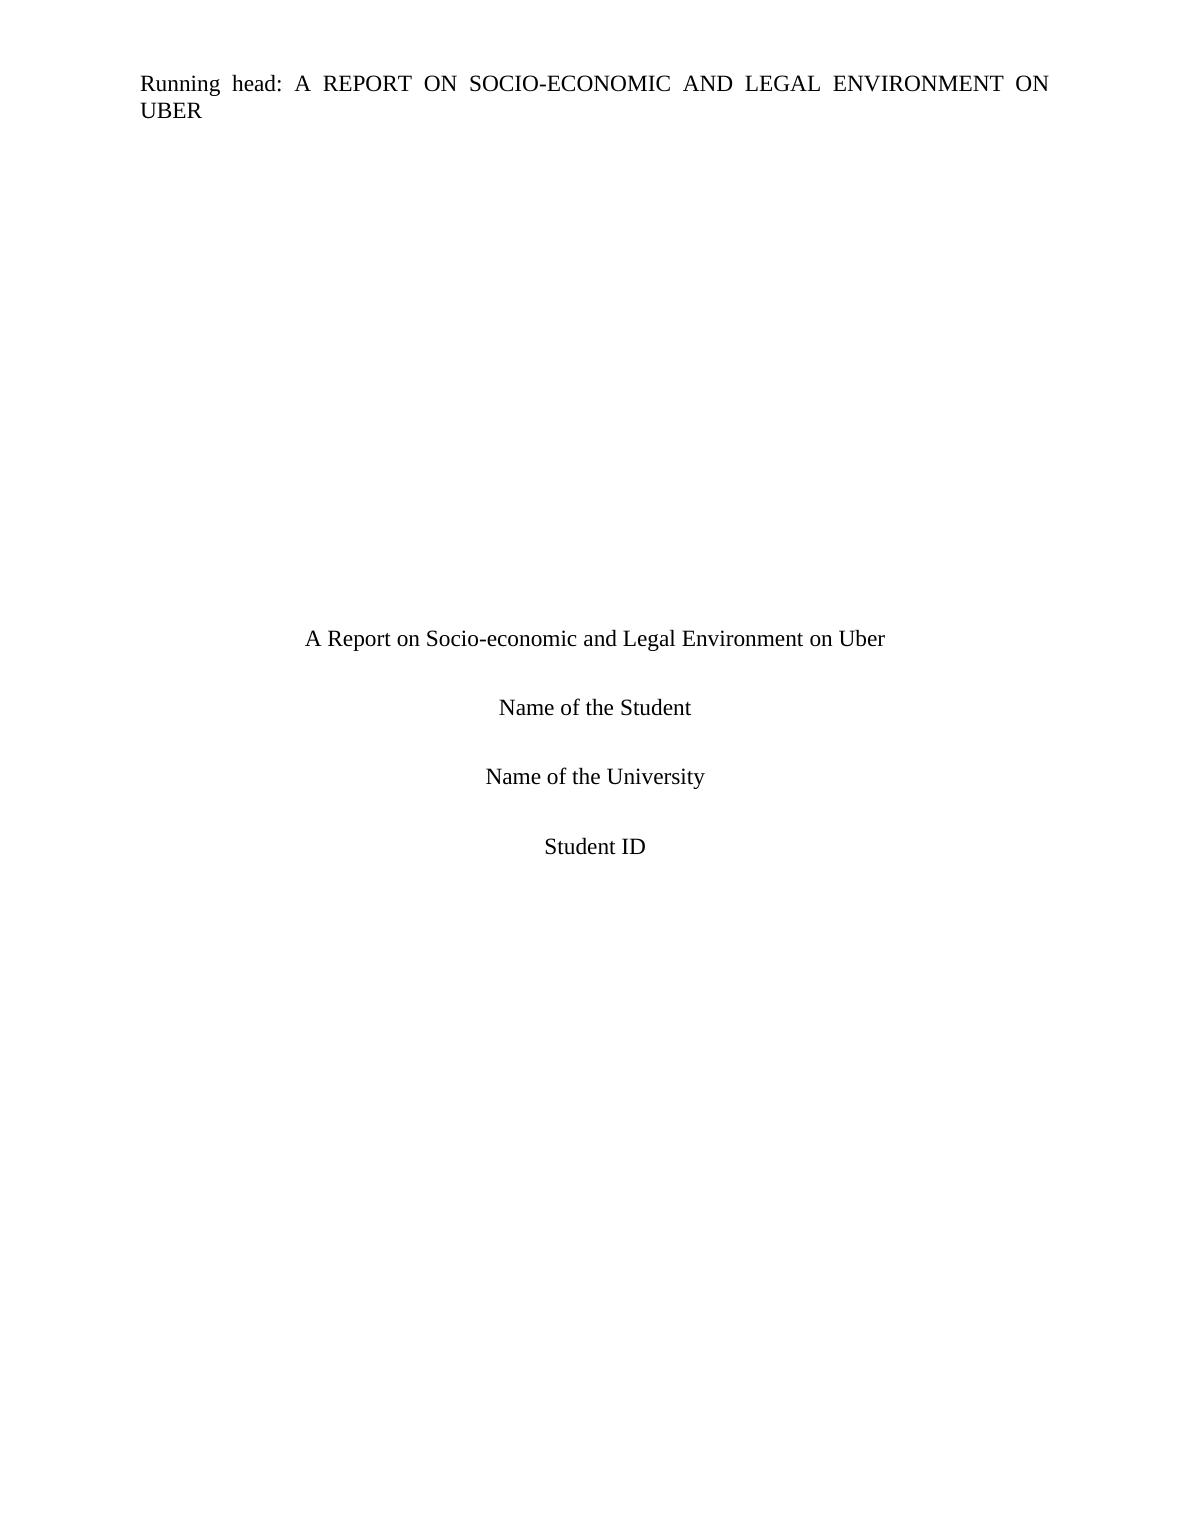 Report on Socio-economic and Legal Environment_1